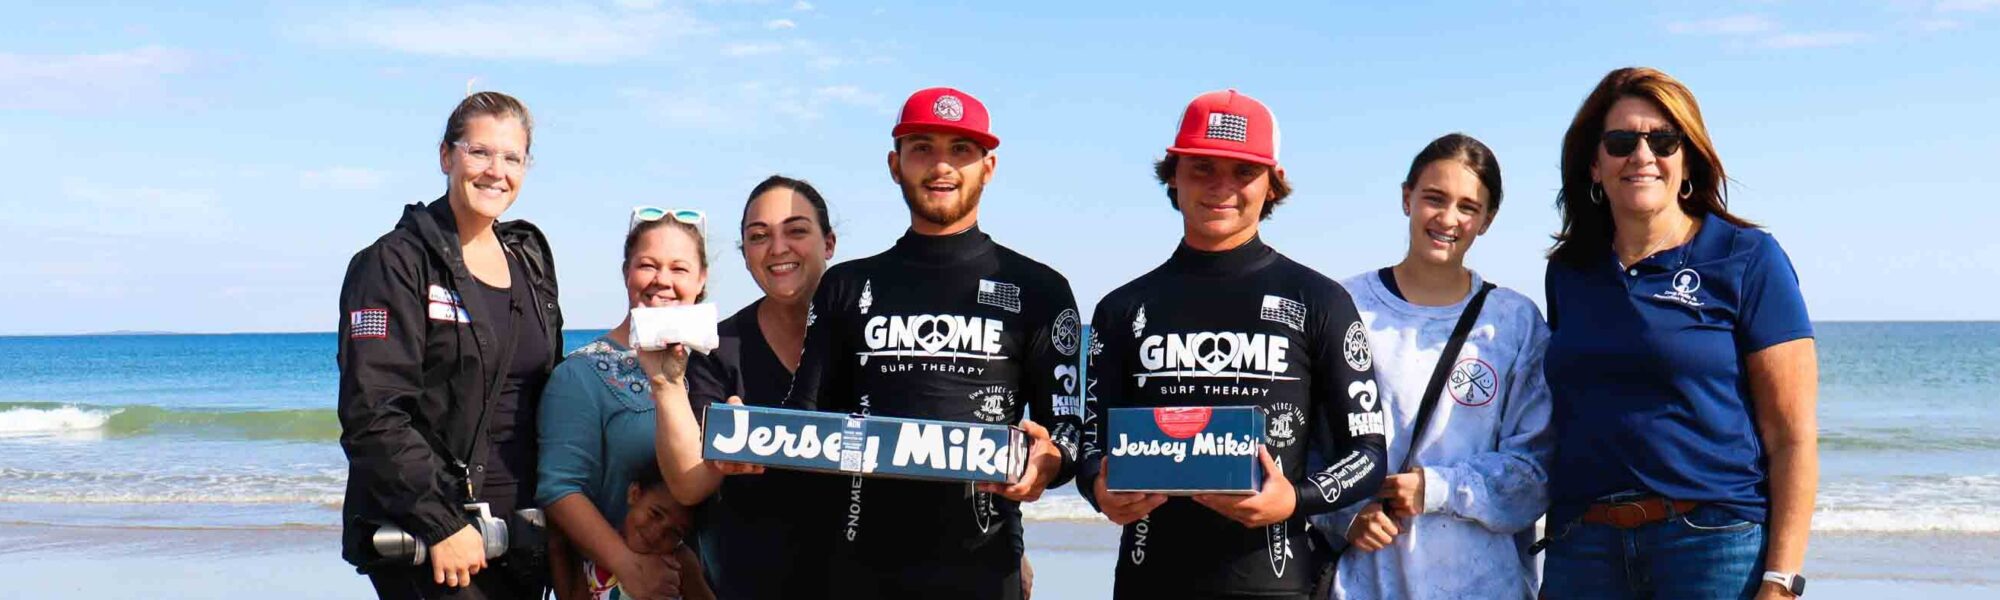 Sponsors Jersey Mike's & Gnome Surf Therapy at the beach